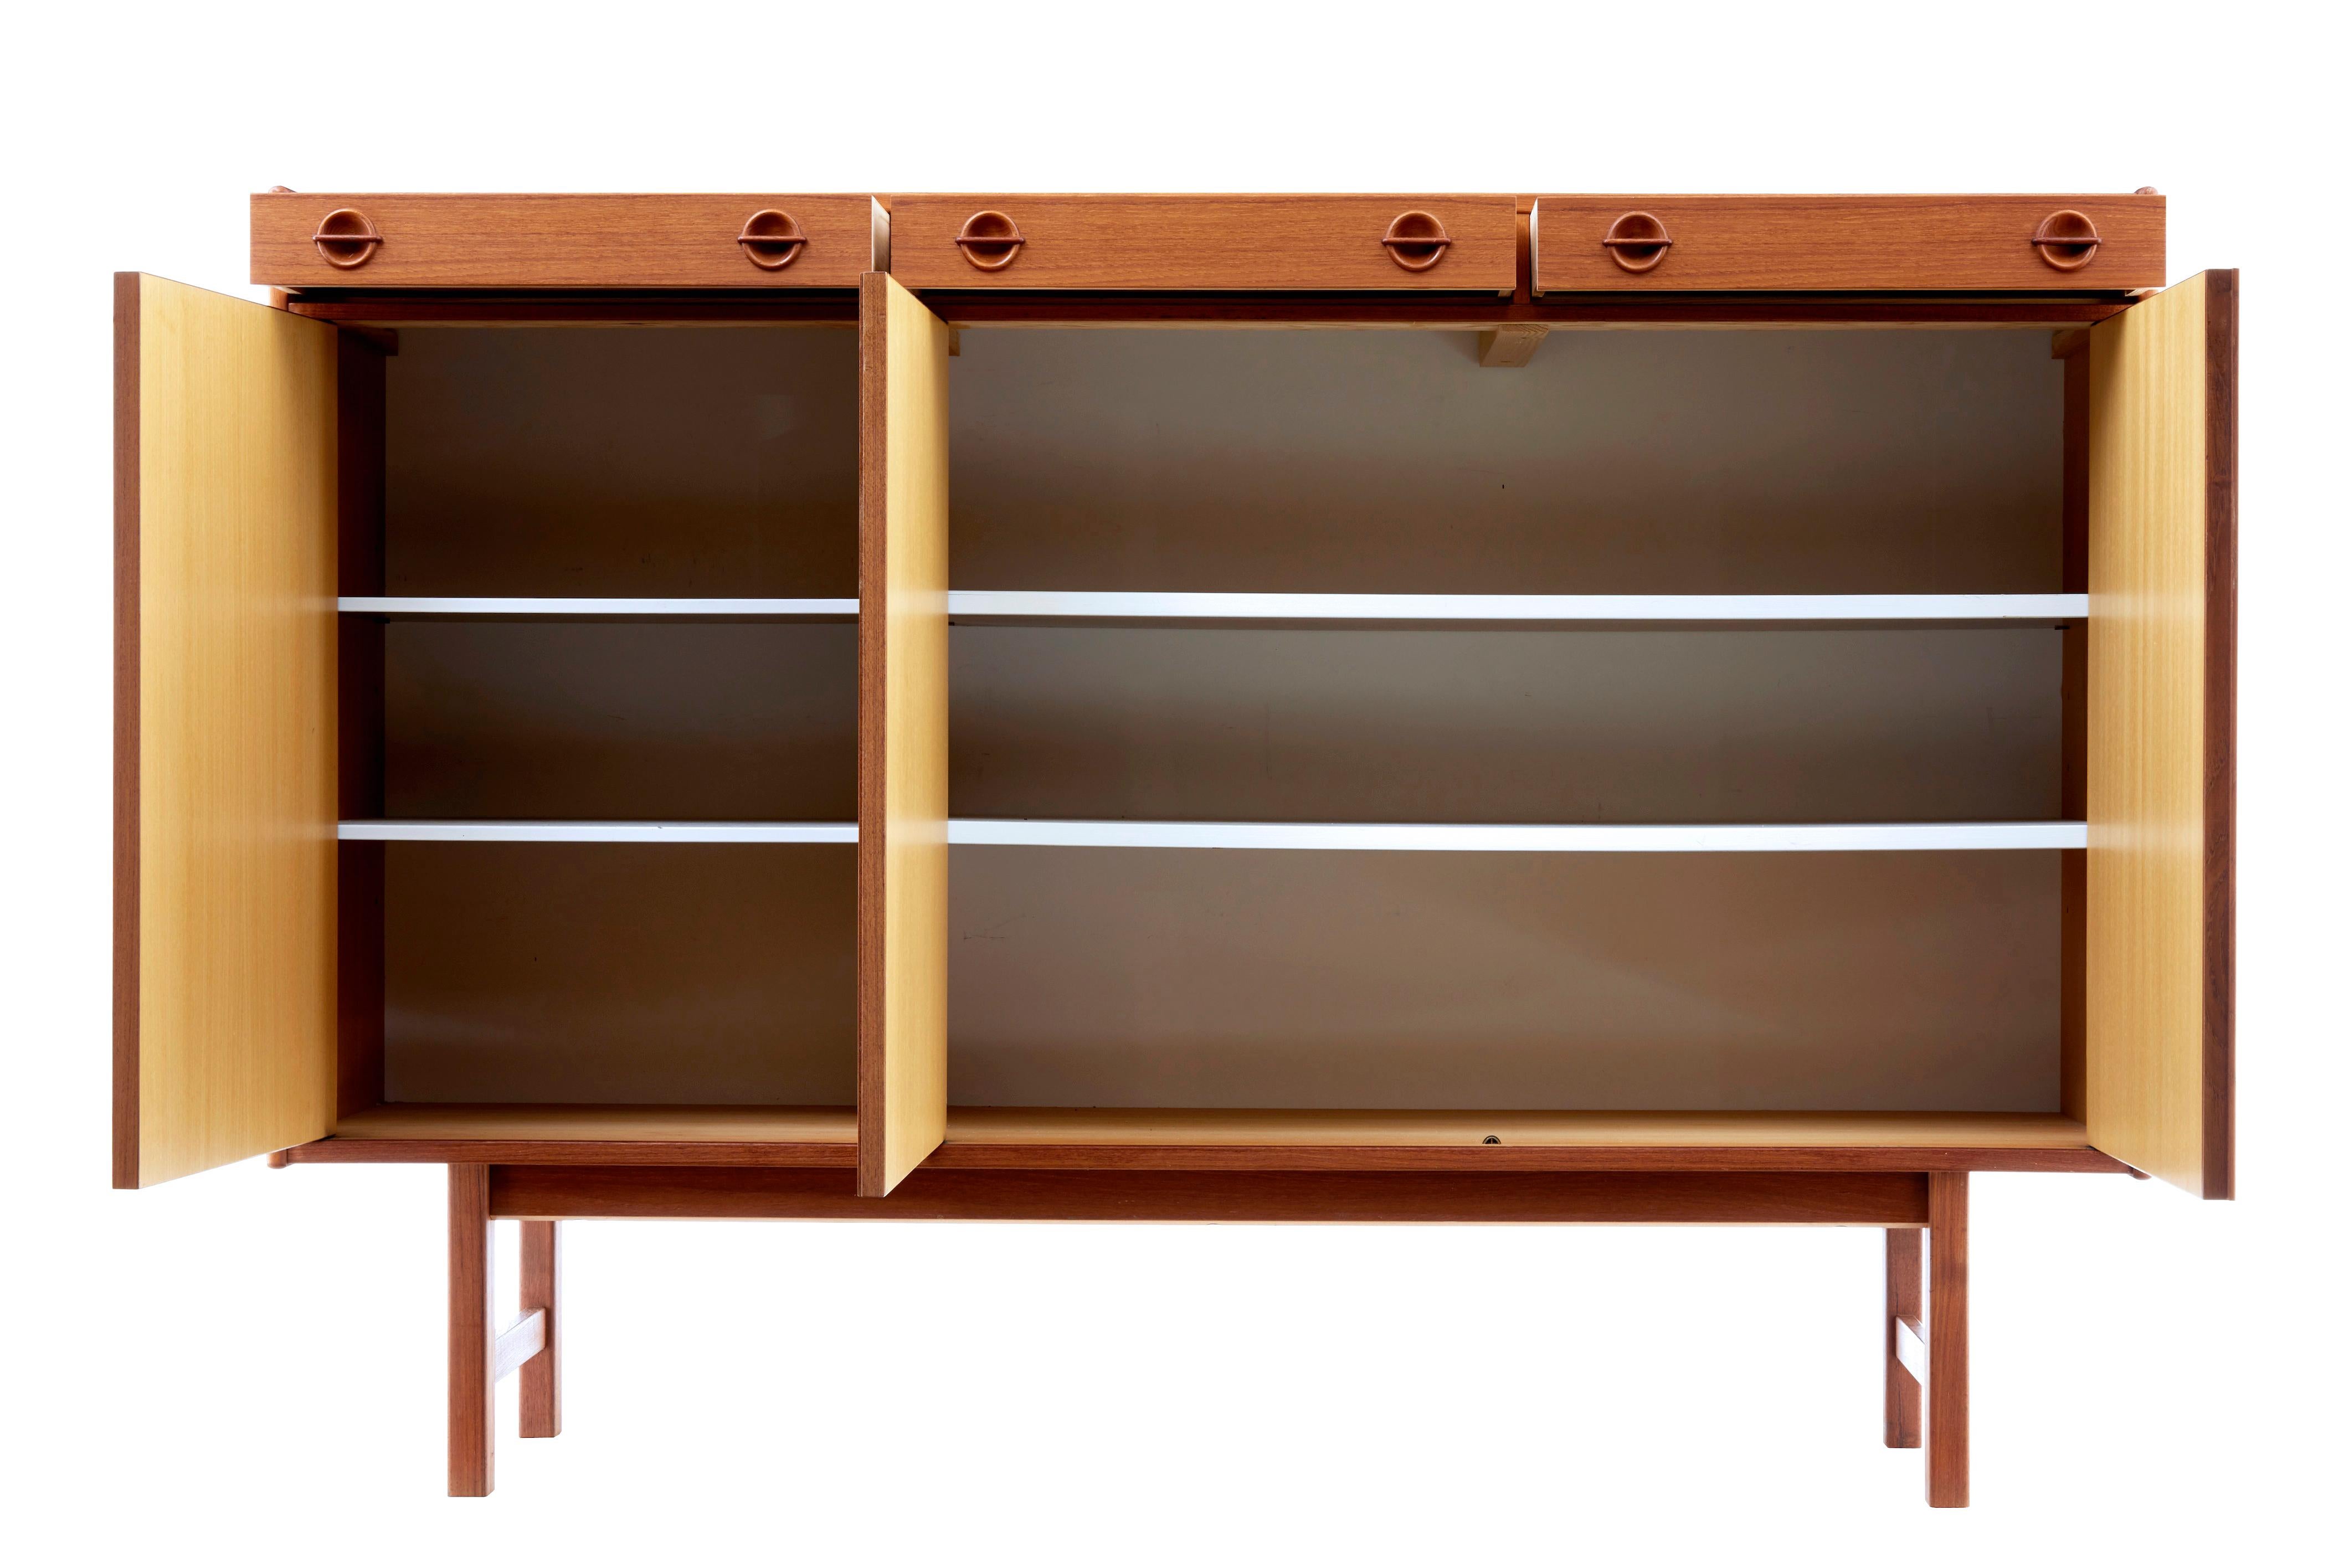 Mid-20th century Danish teak sideboard, circa 1960.

3 drawers in the top, 1 of which has been fitted with compartments and baize for cutlery. Below the drawers are a single and double door cupboard, each containing 2 shelves.

Minor surface